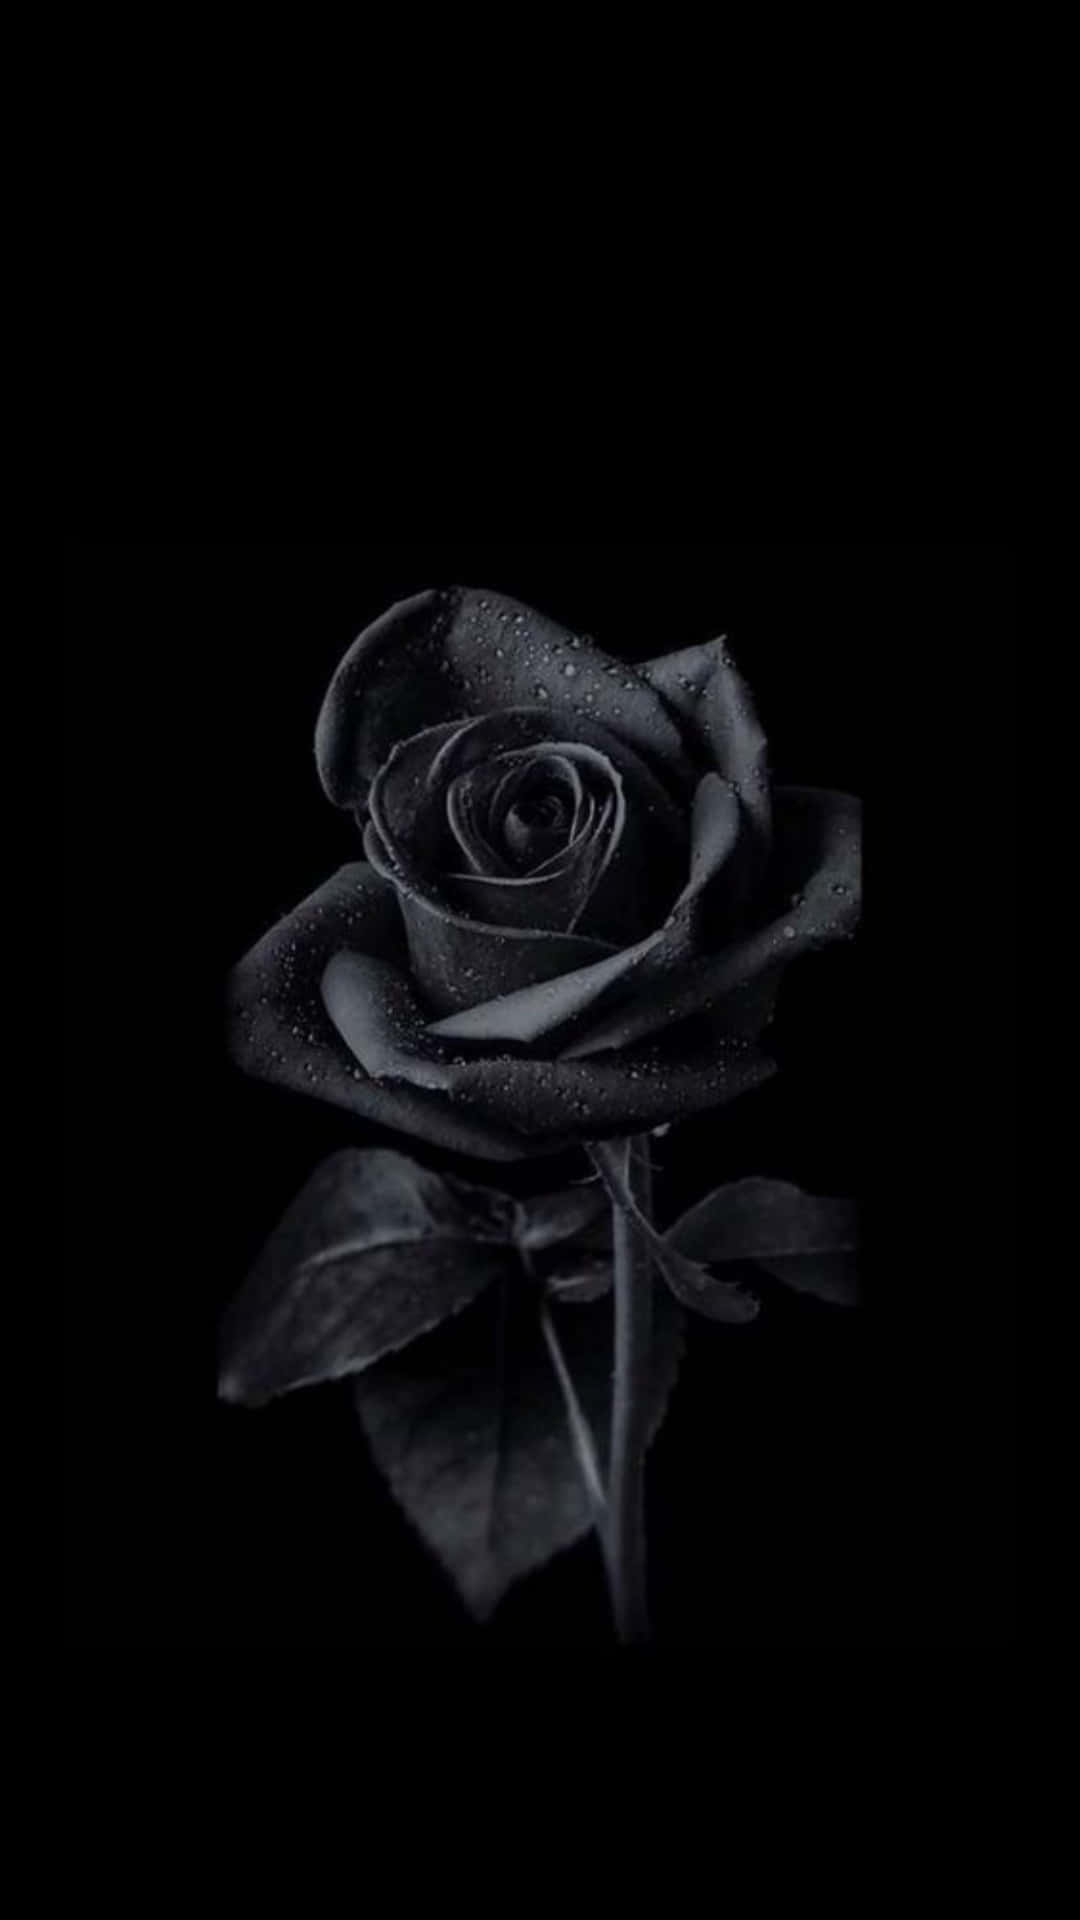 Monochrome Rose With Dewdrops